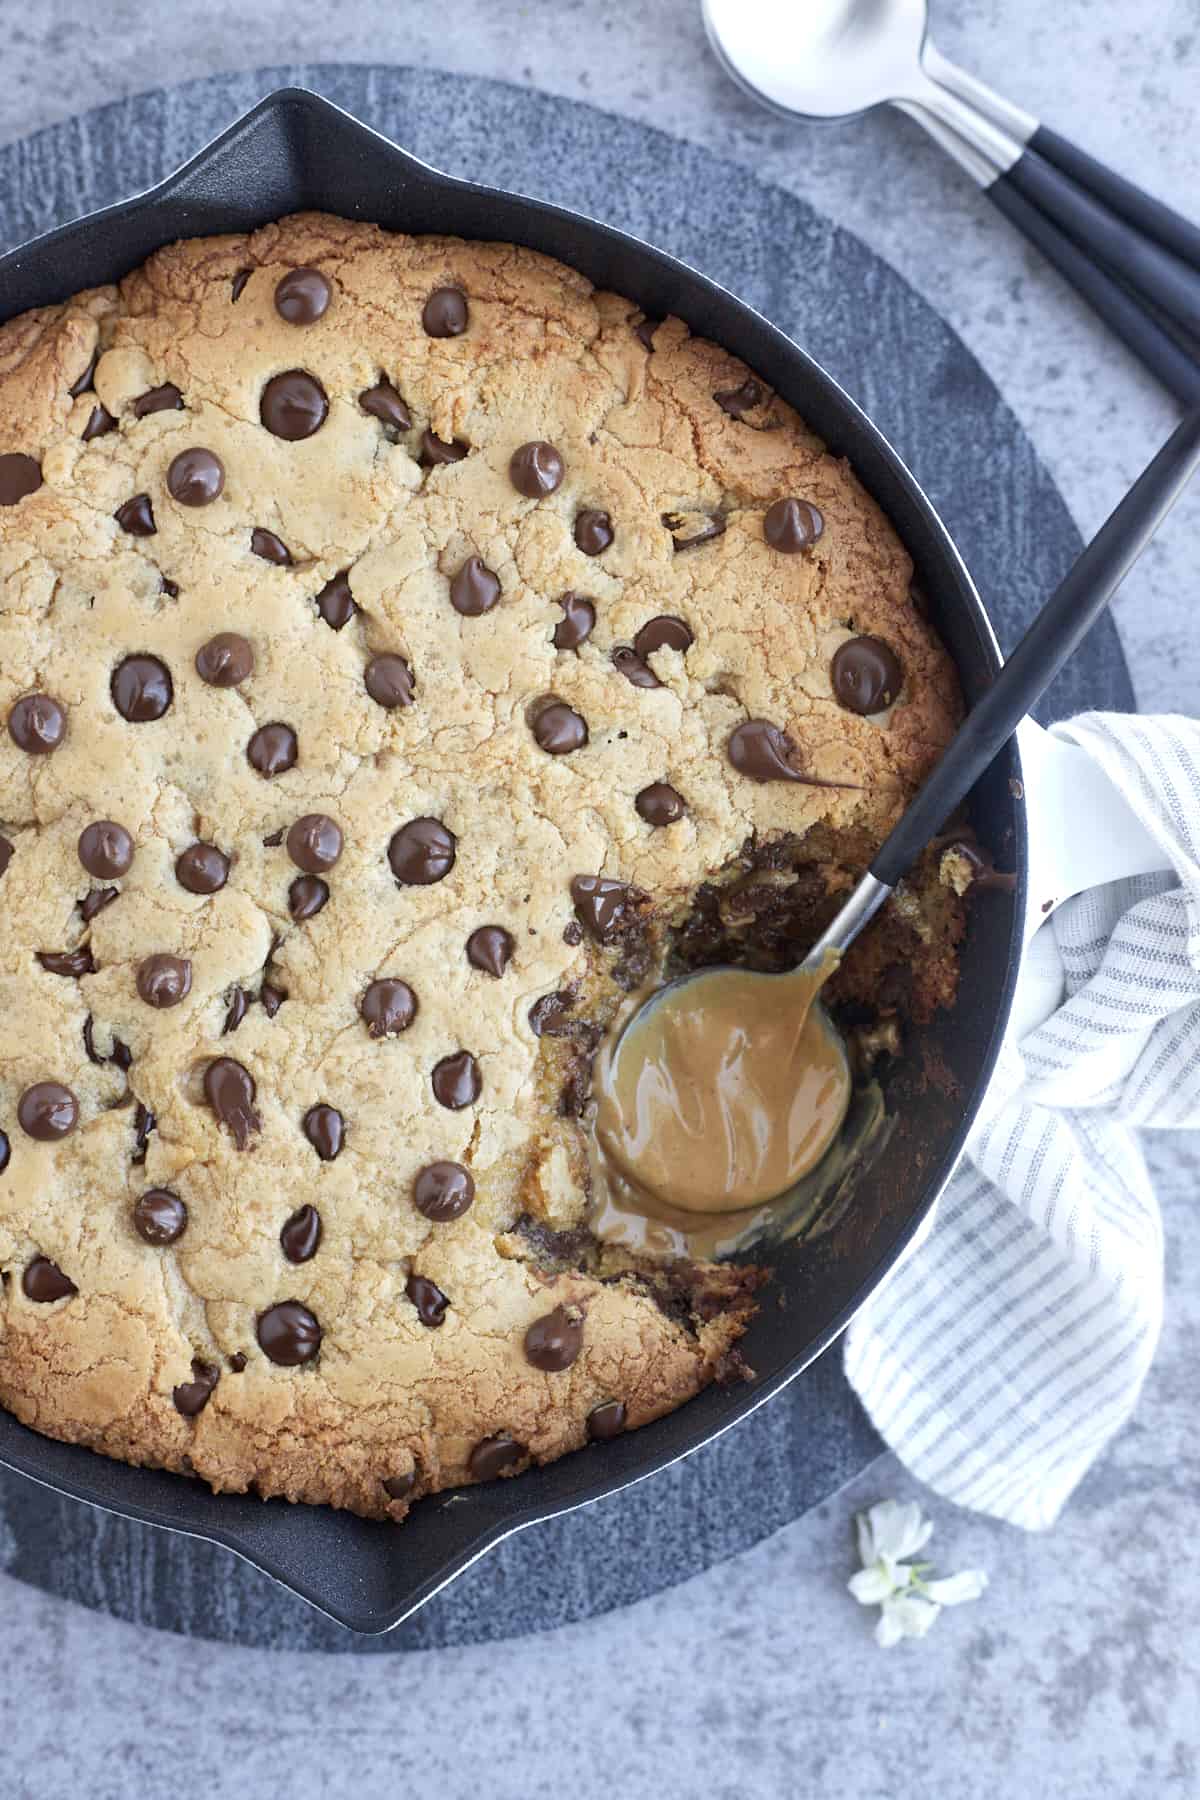 peanut butter chocolate chip cookie skillet with bites missing and a peanut butter coated spoon in their place